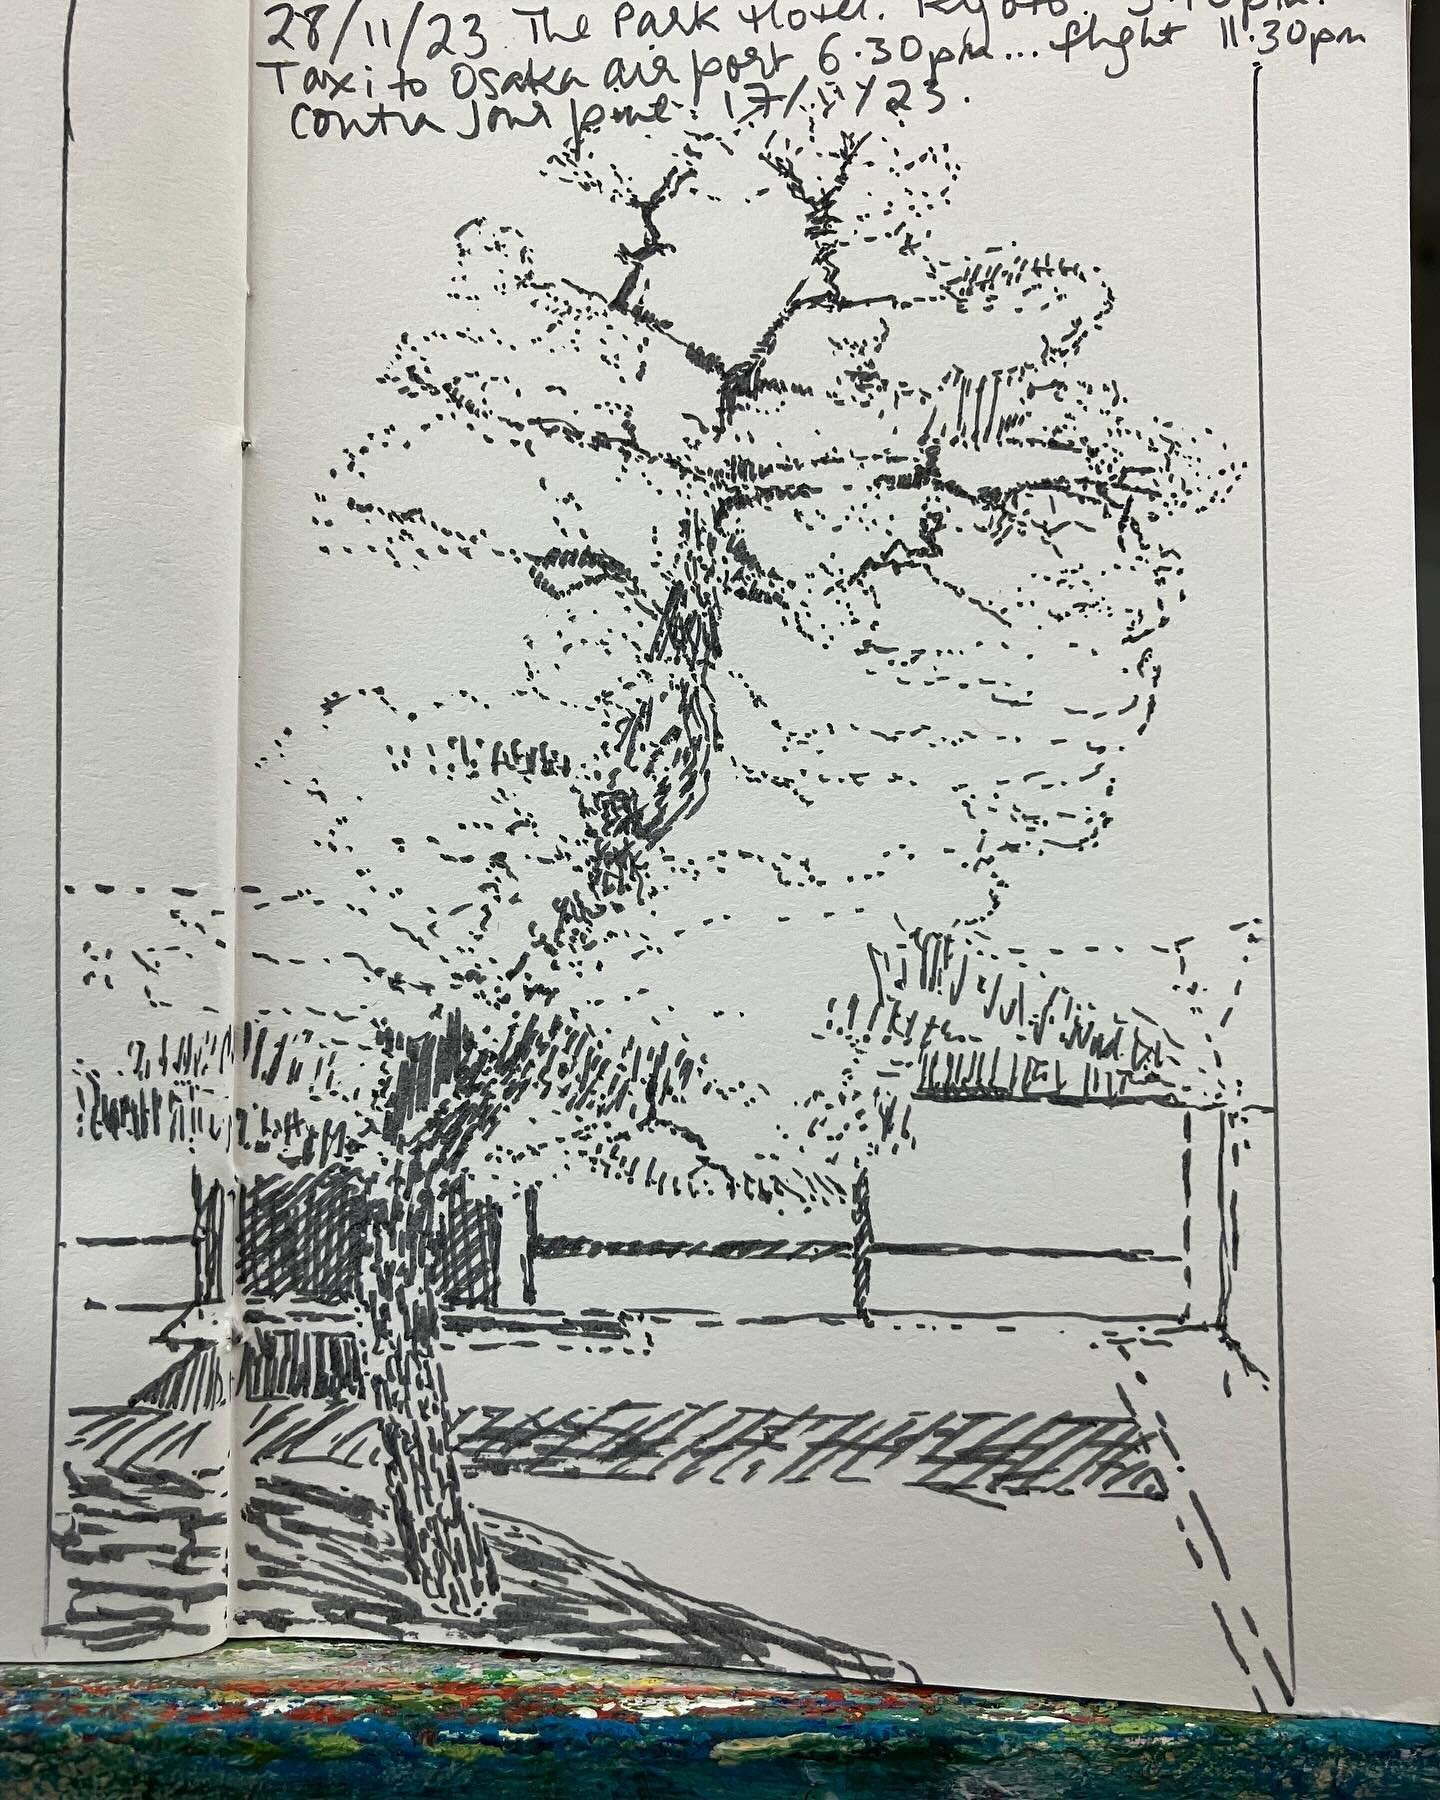 Sketch while waiting for transport to the airport. This one has potential for a painting. I&rsquo;m excited by the tree trunk sinuously weaving from the lower left foreground up into the more ambiguous upper right spatial plane. 

Made in Ross Galler